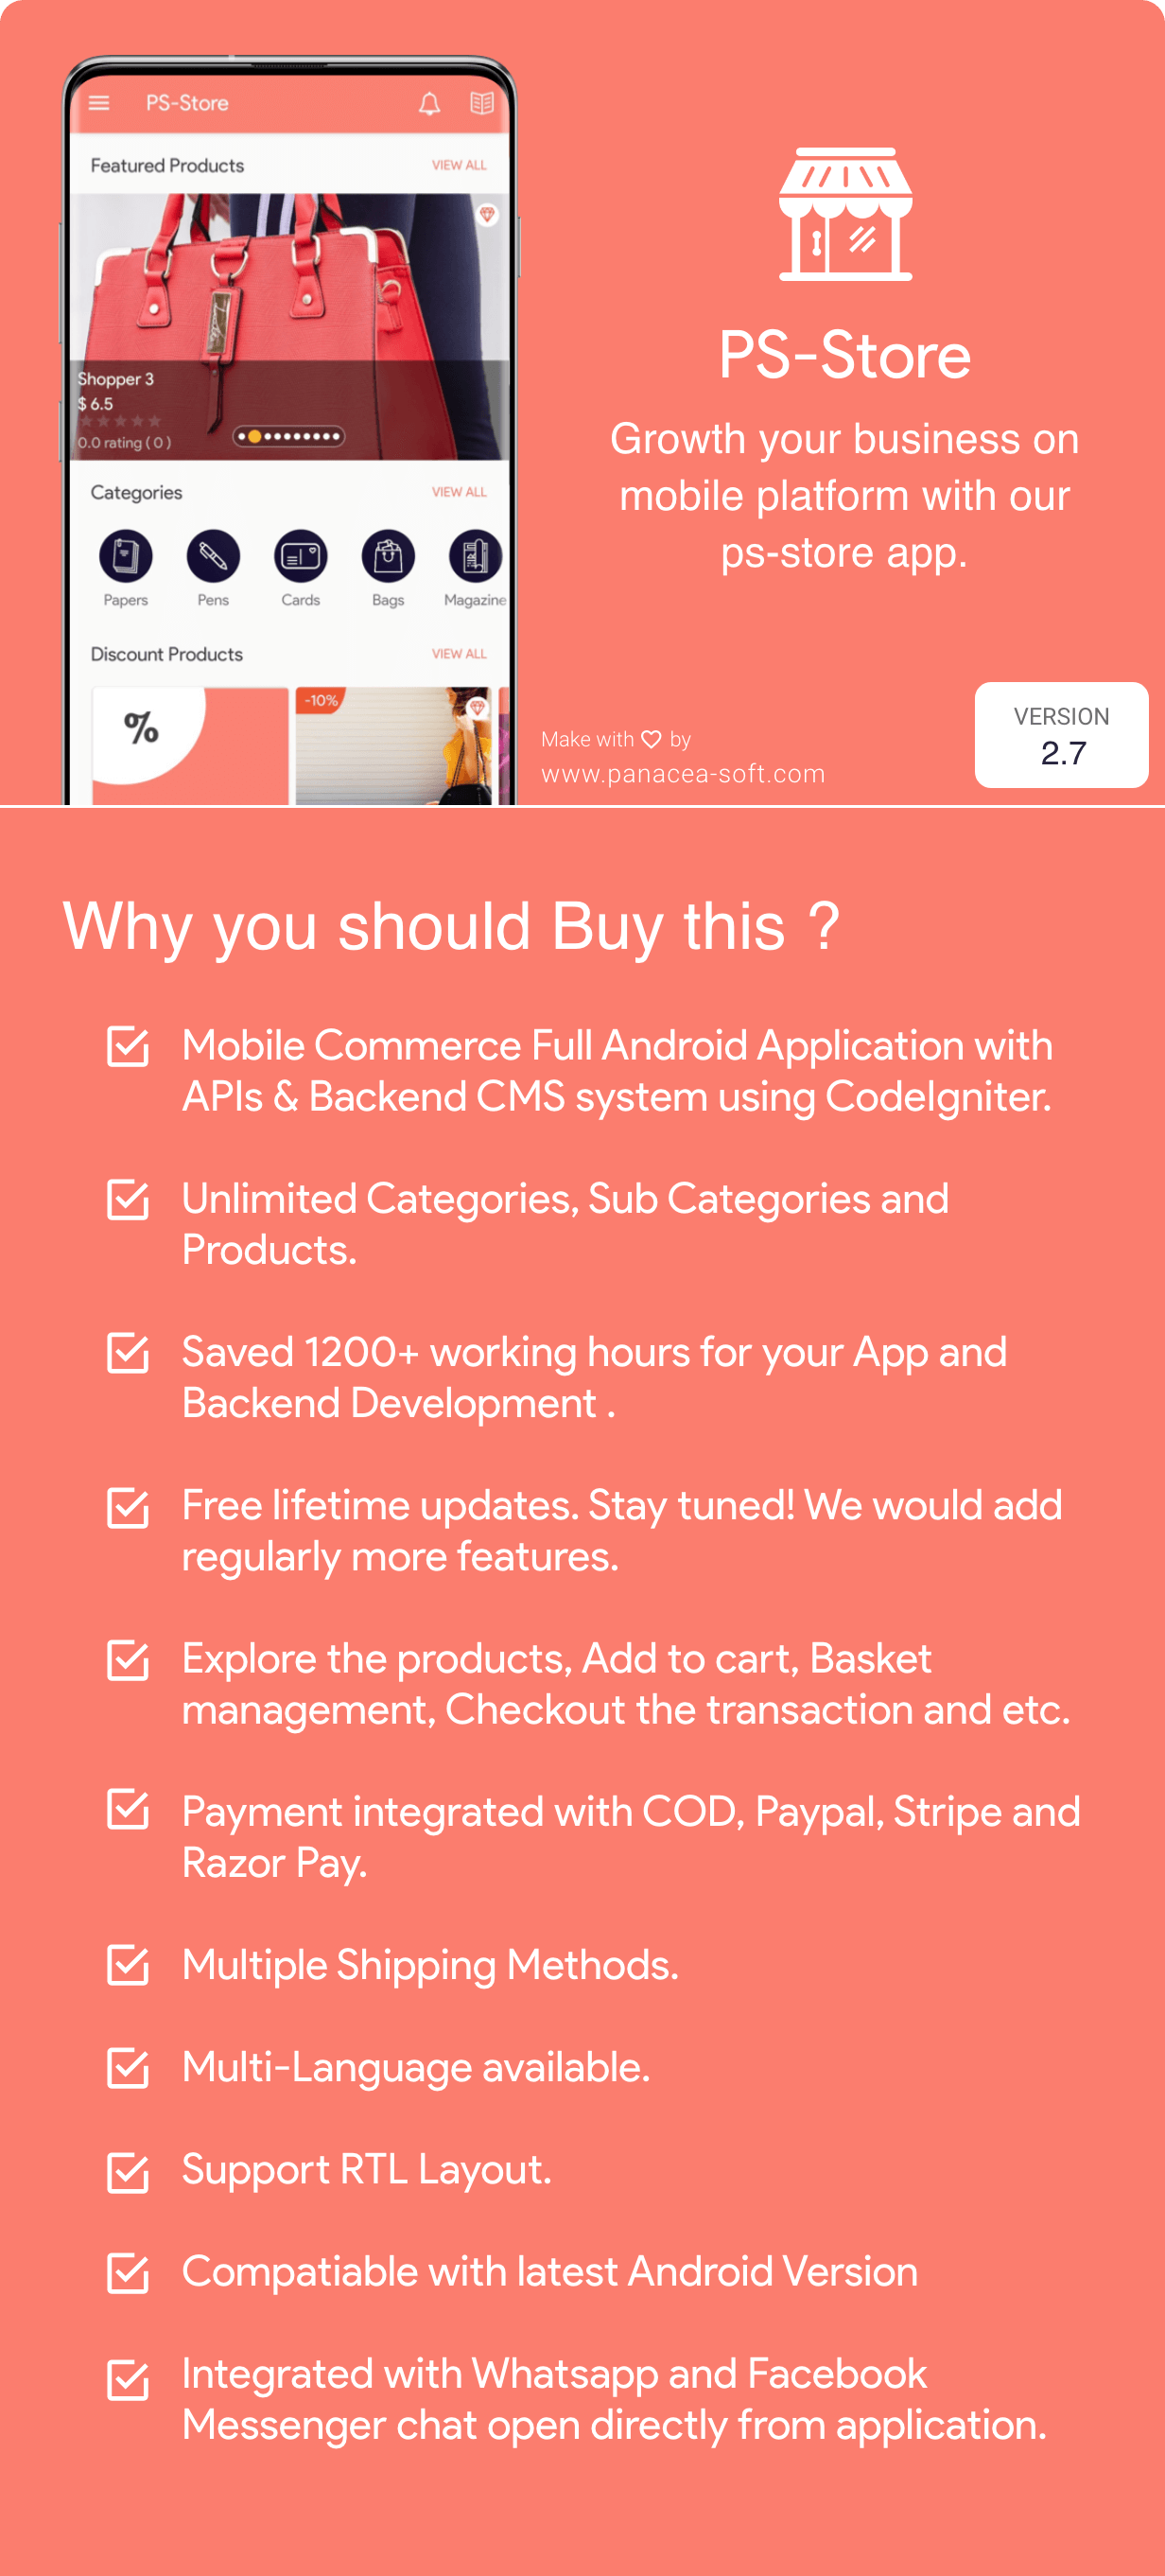 PS Store ( Mobile eCommerce App for Every Business Owner ) 2.6 - 2